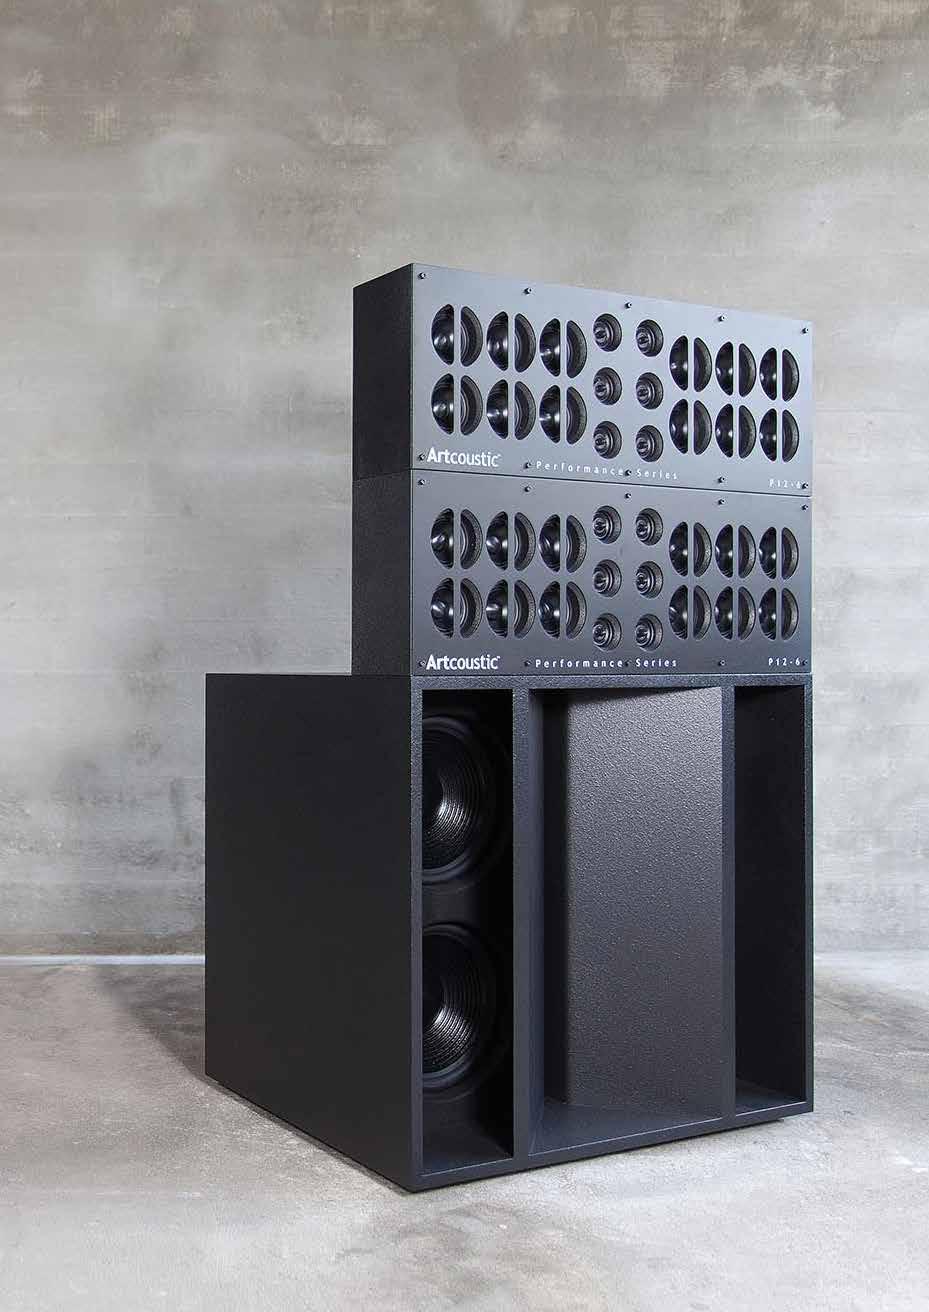 We understand the importance of sensitivity and high sound pressure levels, but we have never been willing to sacrifice the true qualities, typically enjoyed with lower sensitivity, Hi-Fi speakers.